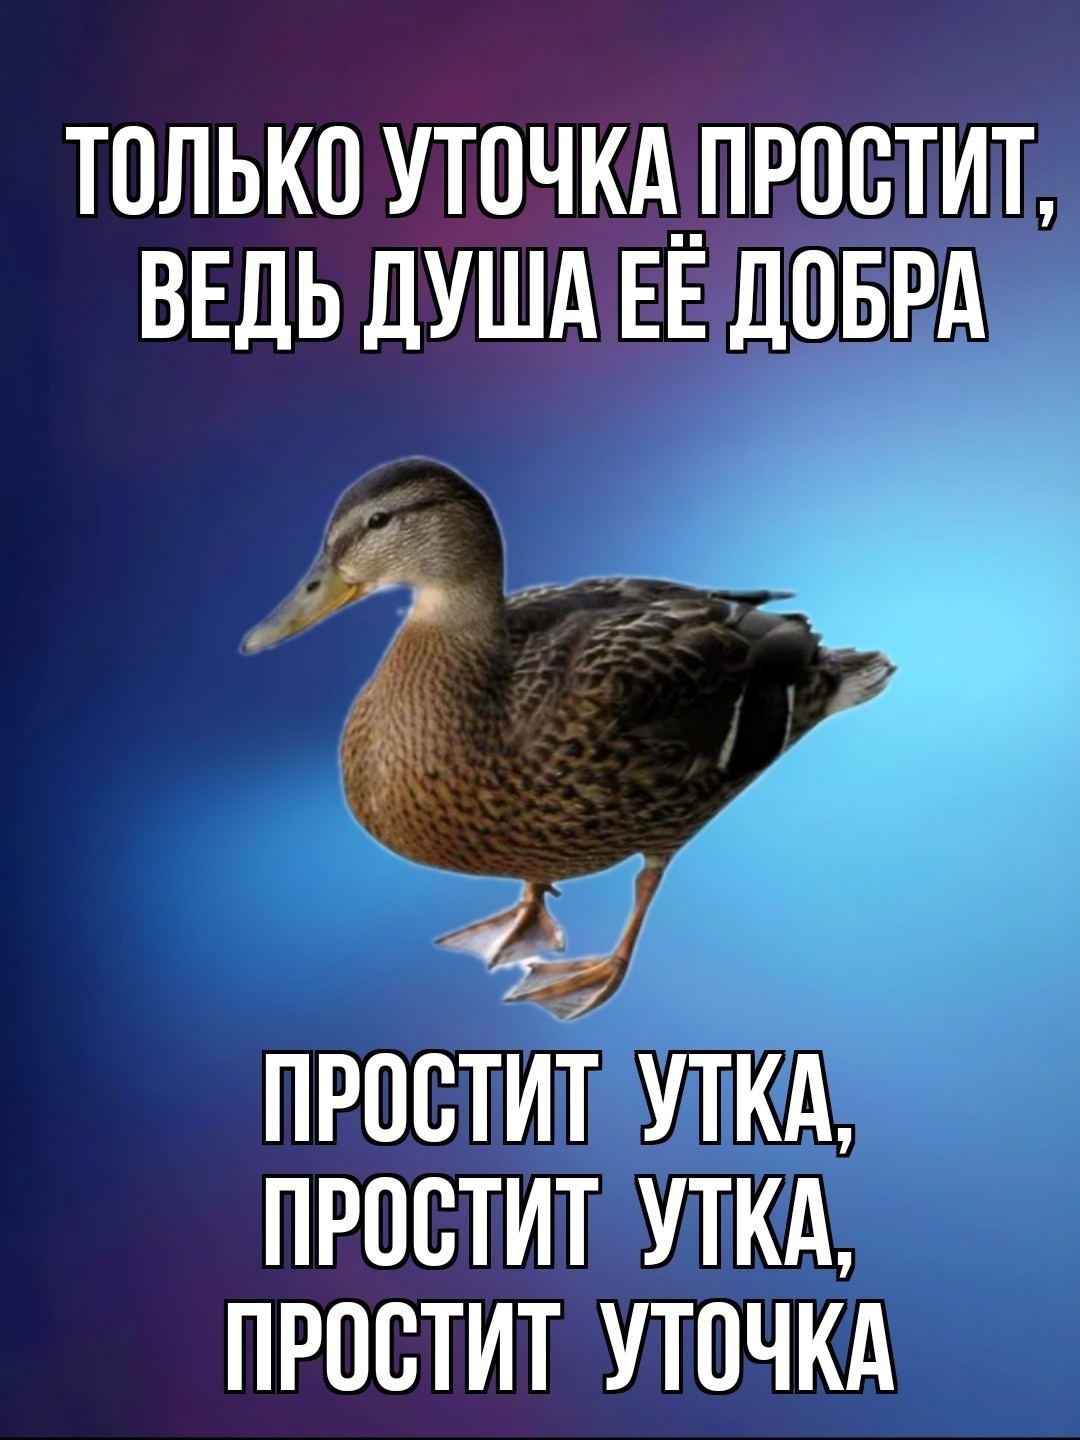 A prostitute - Humor, Picture with text, Duck, Strange humor, Longpost